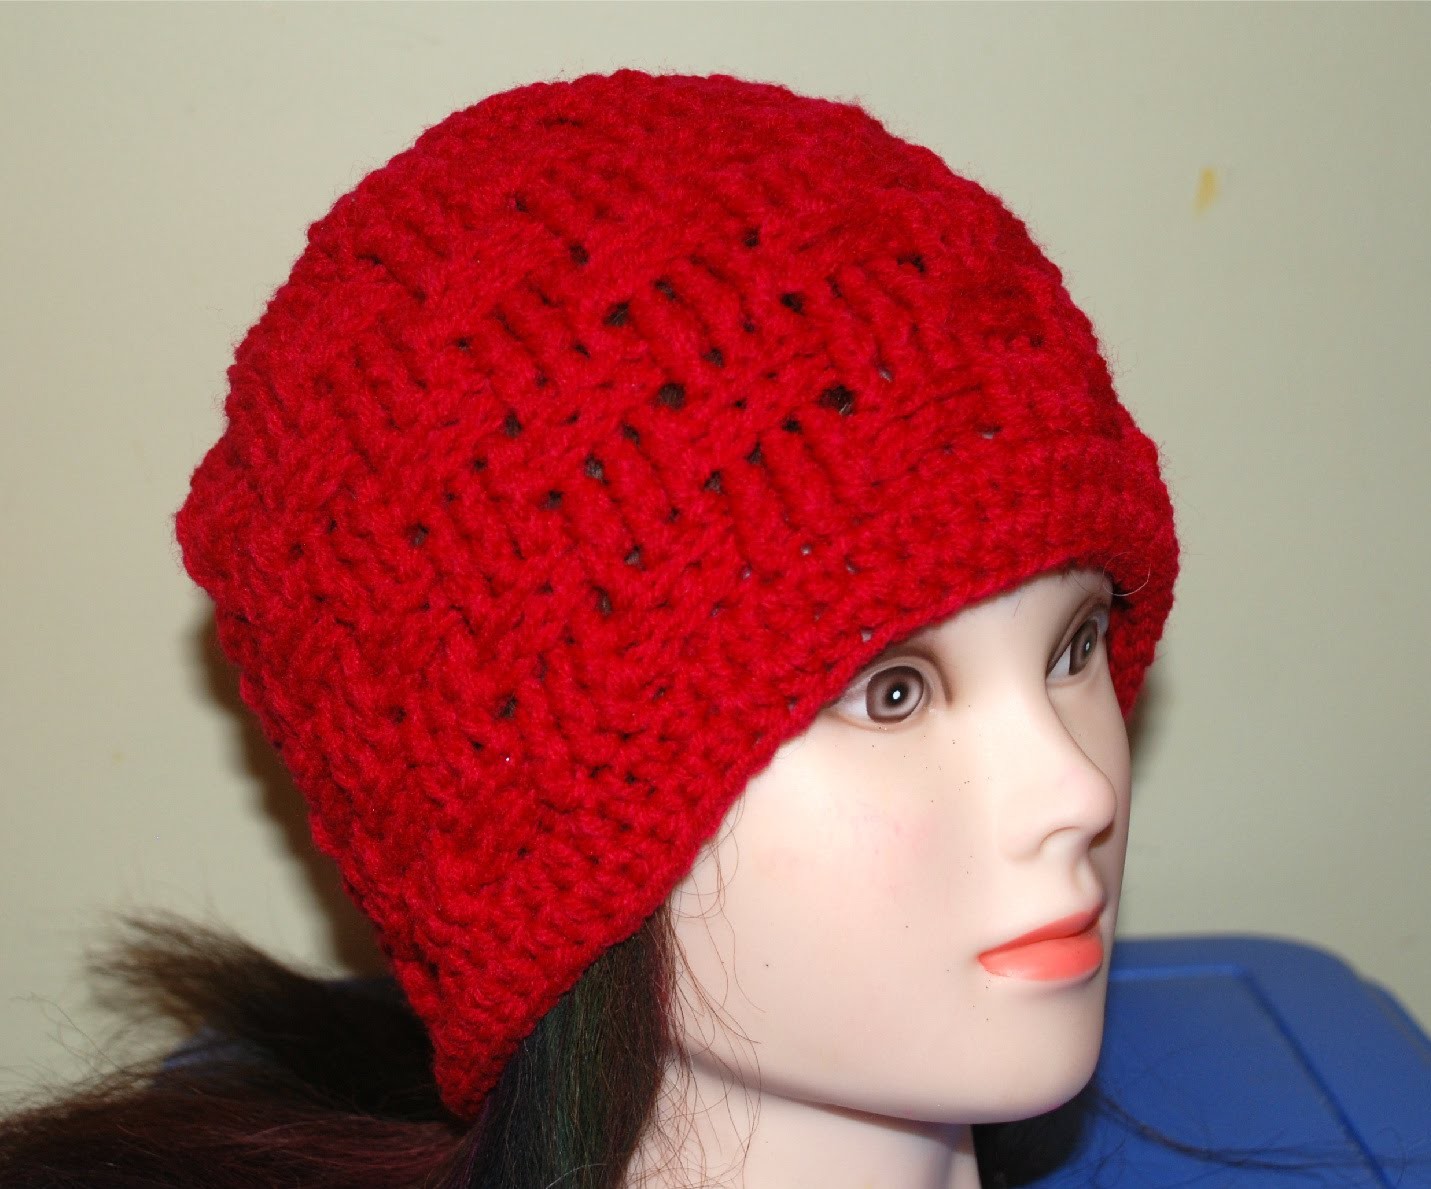 How to Crochet a Basket Weave Hat (All Sizes) Part II